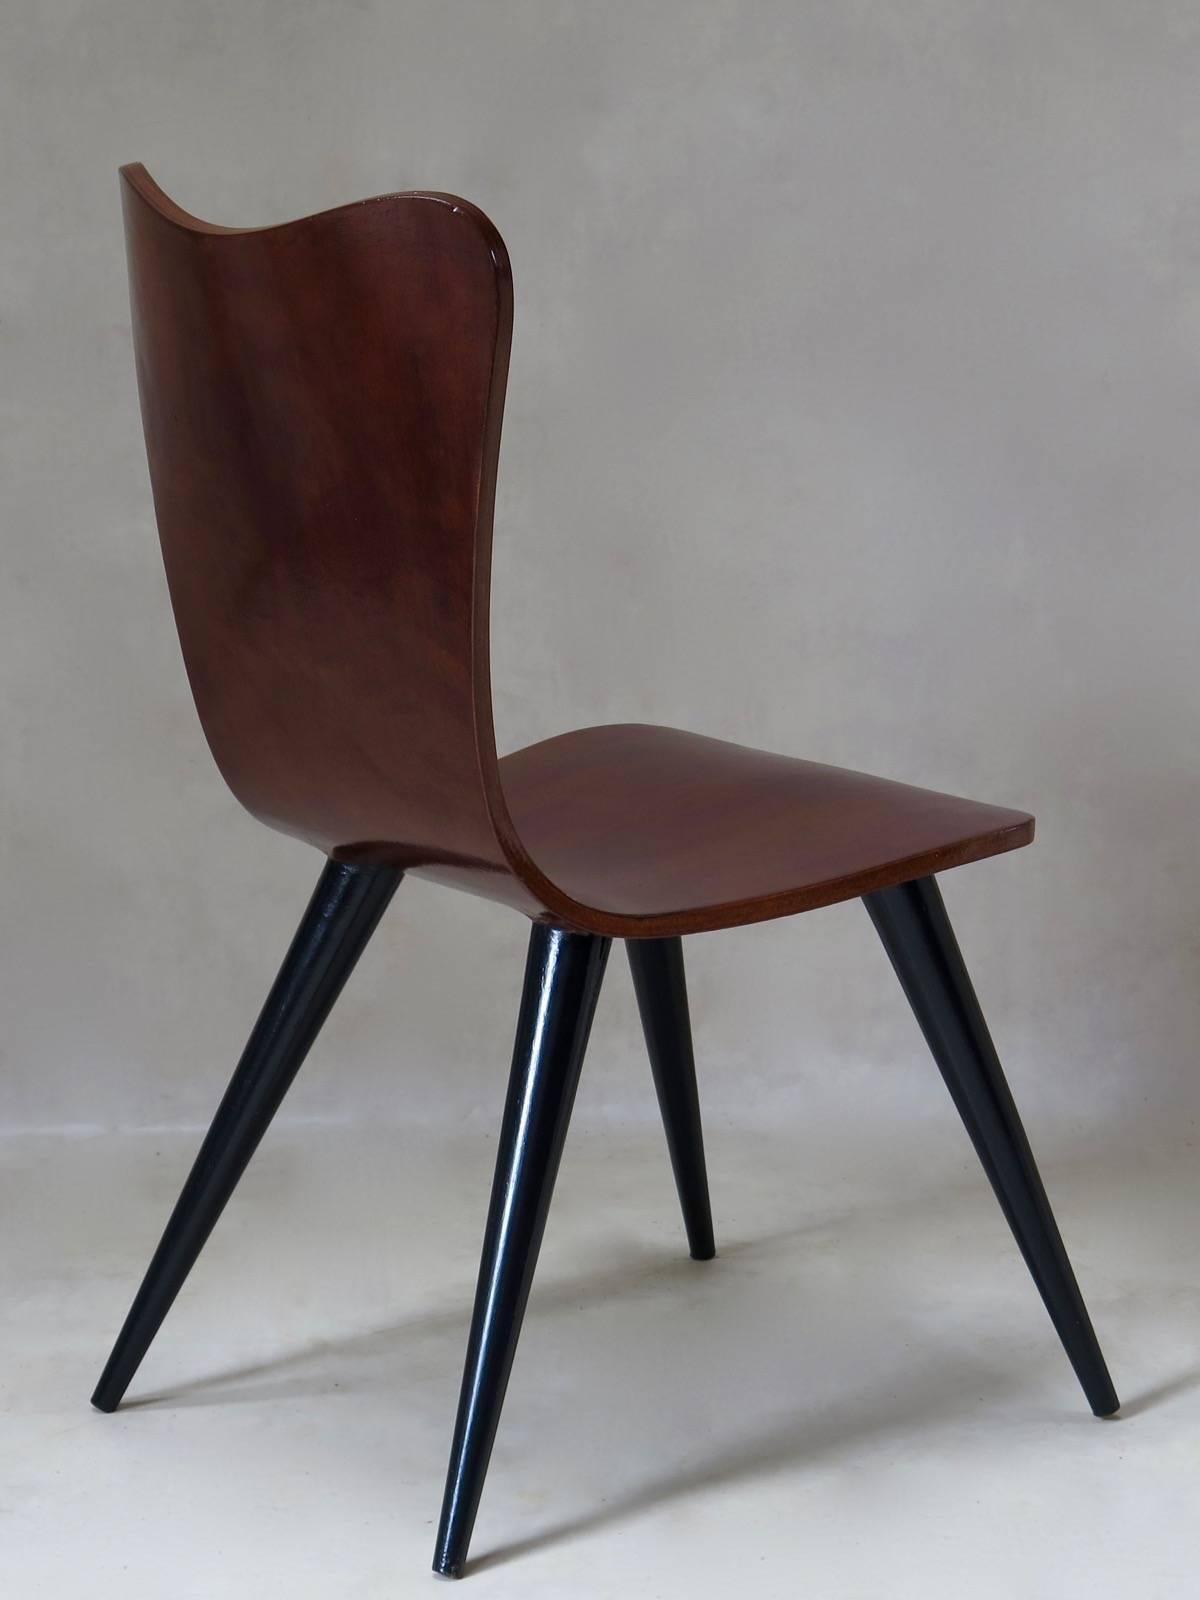 French Six Molded Plywood Chairs, 1950s For Sale